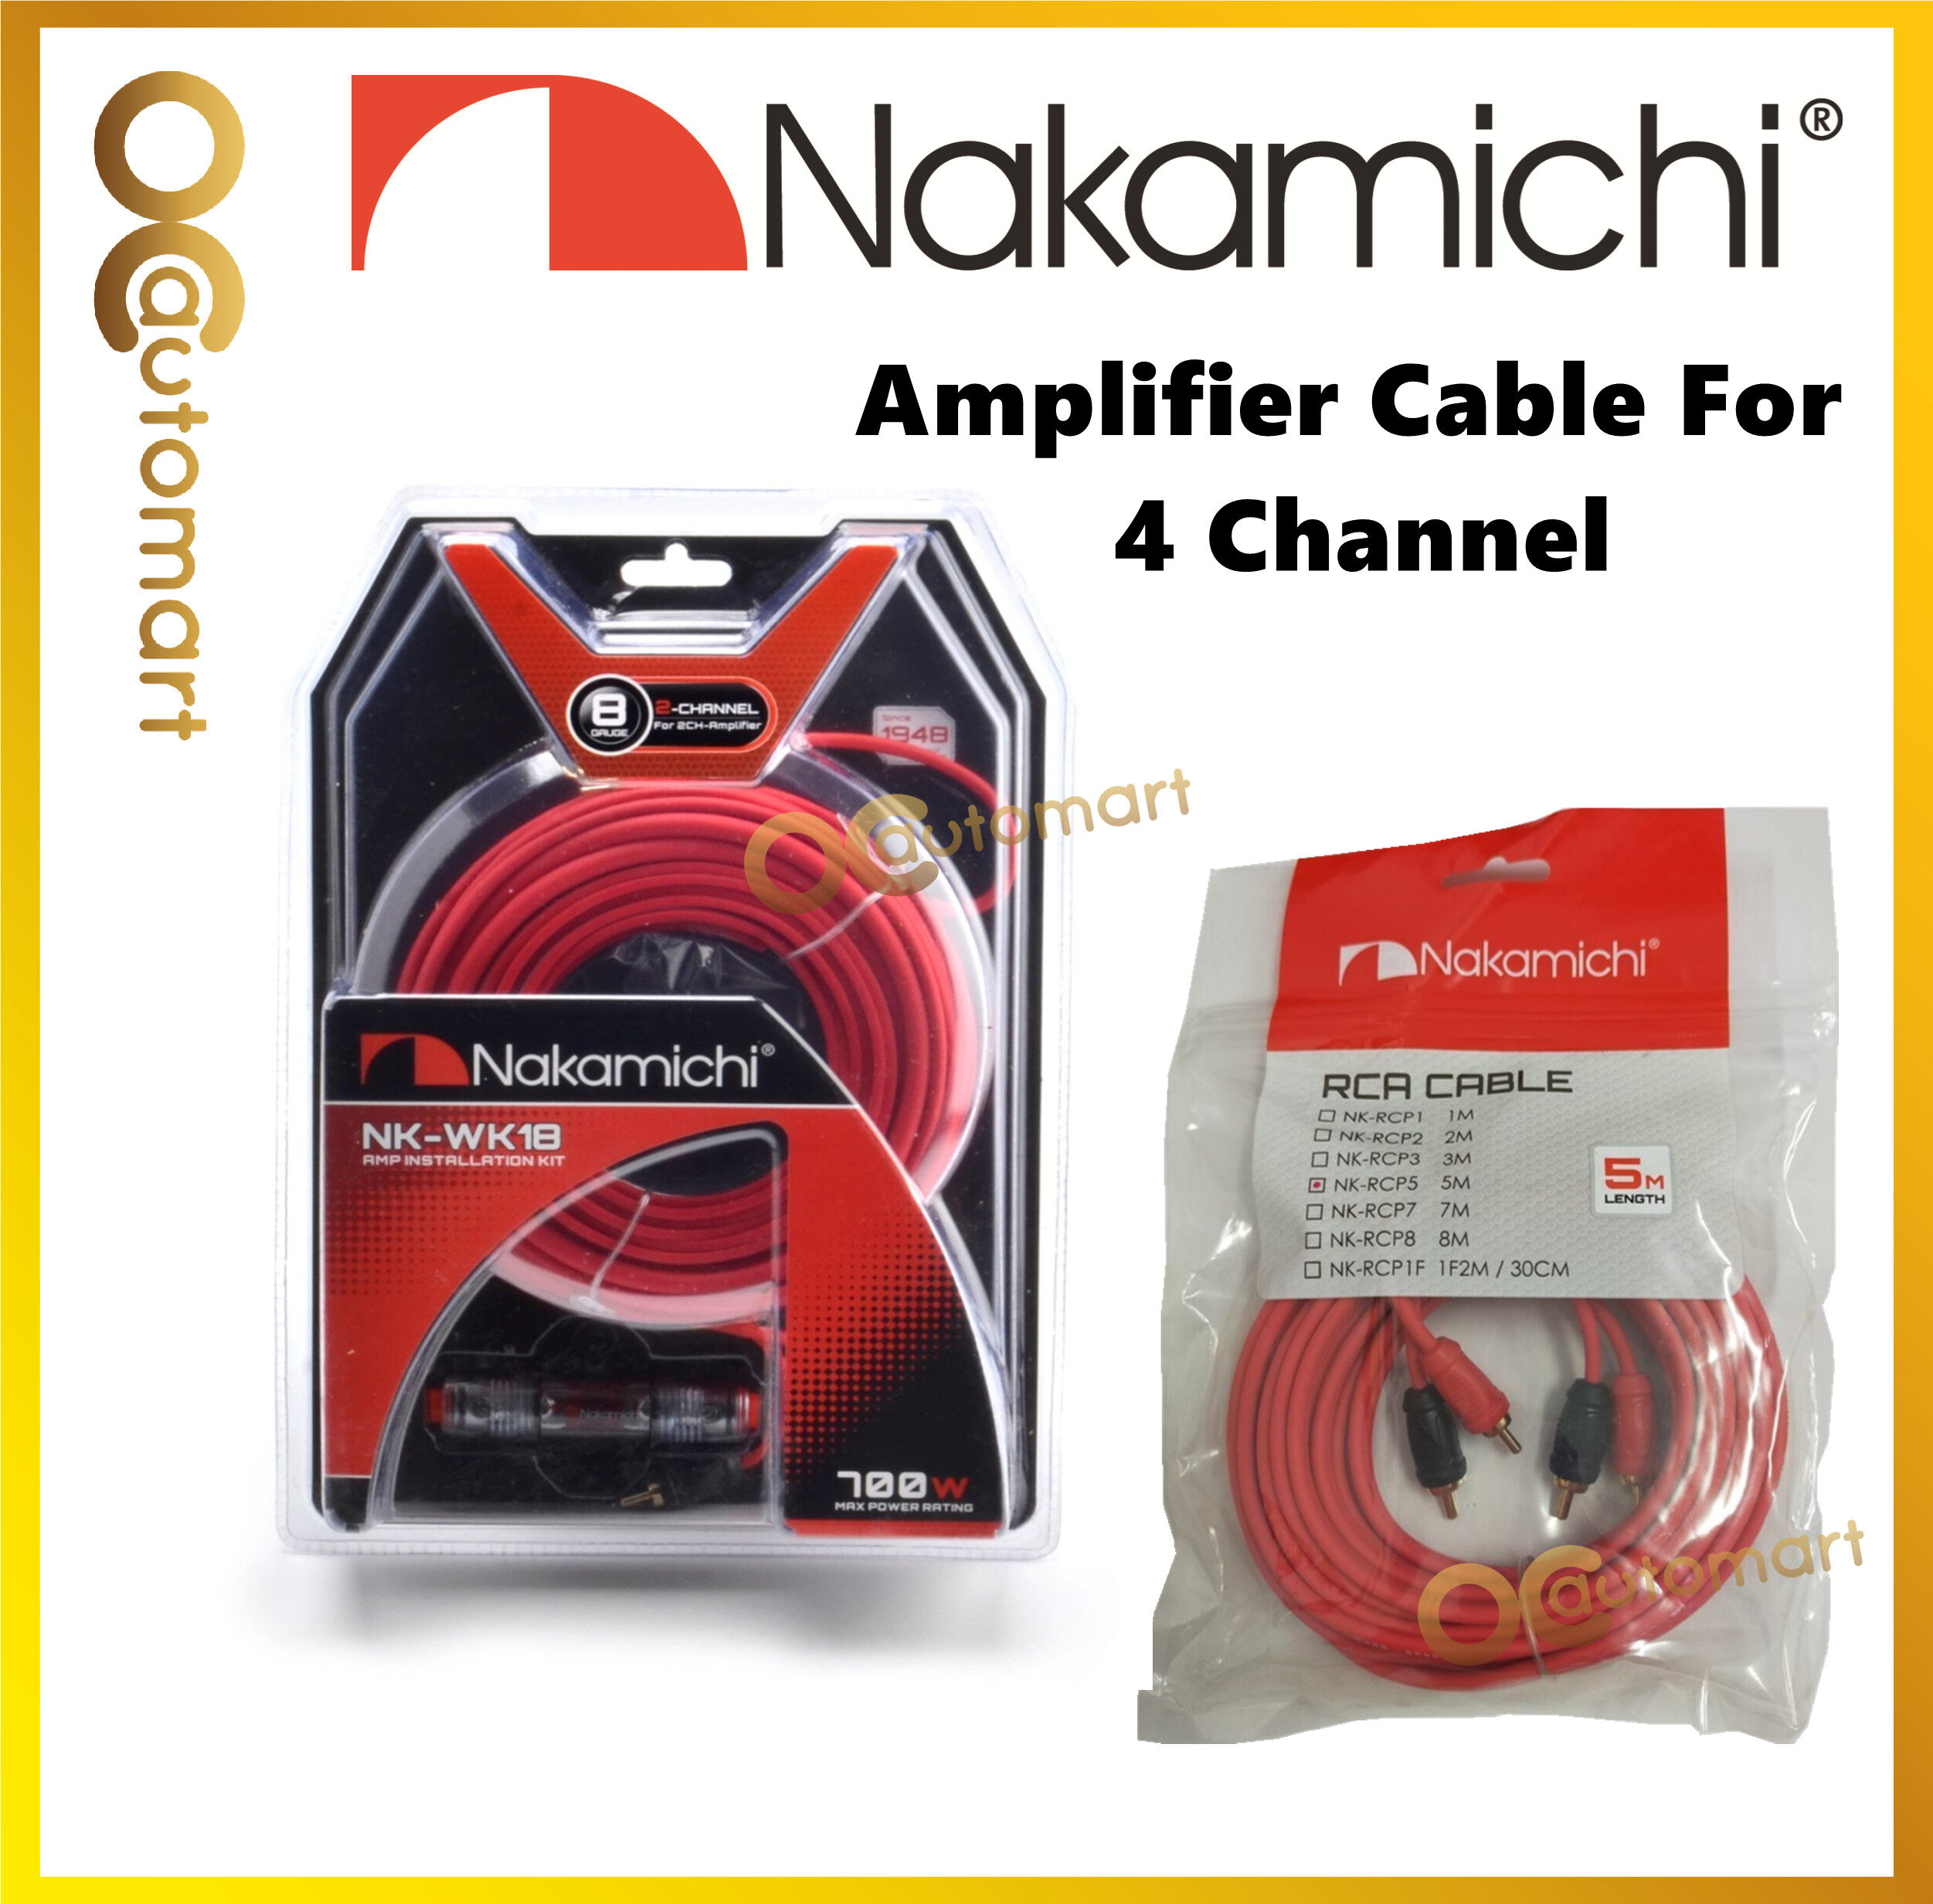 Nakamichi 4 Channel Cable Set 8GA Wiring Kit NK-WK18 With NK-RCP5 5 Meter RCA Cable Set For Amplifier 4-Channel